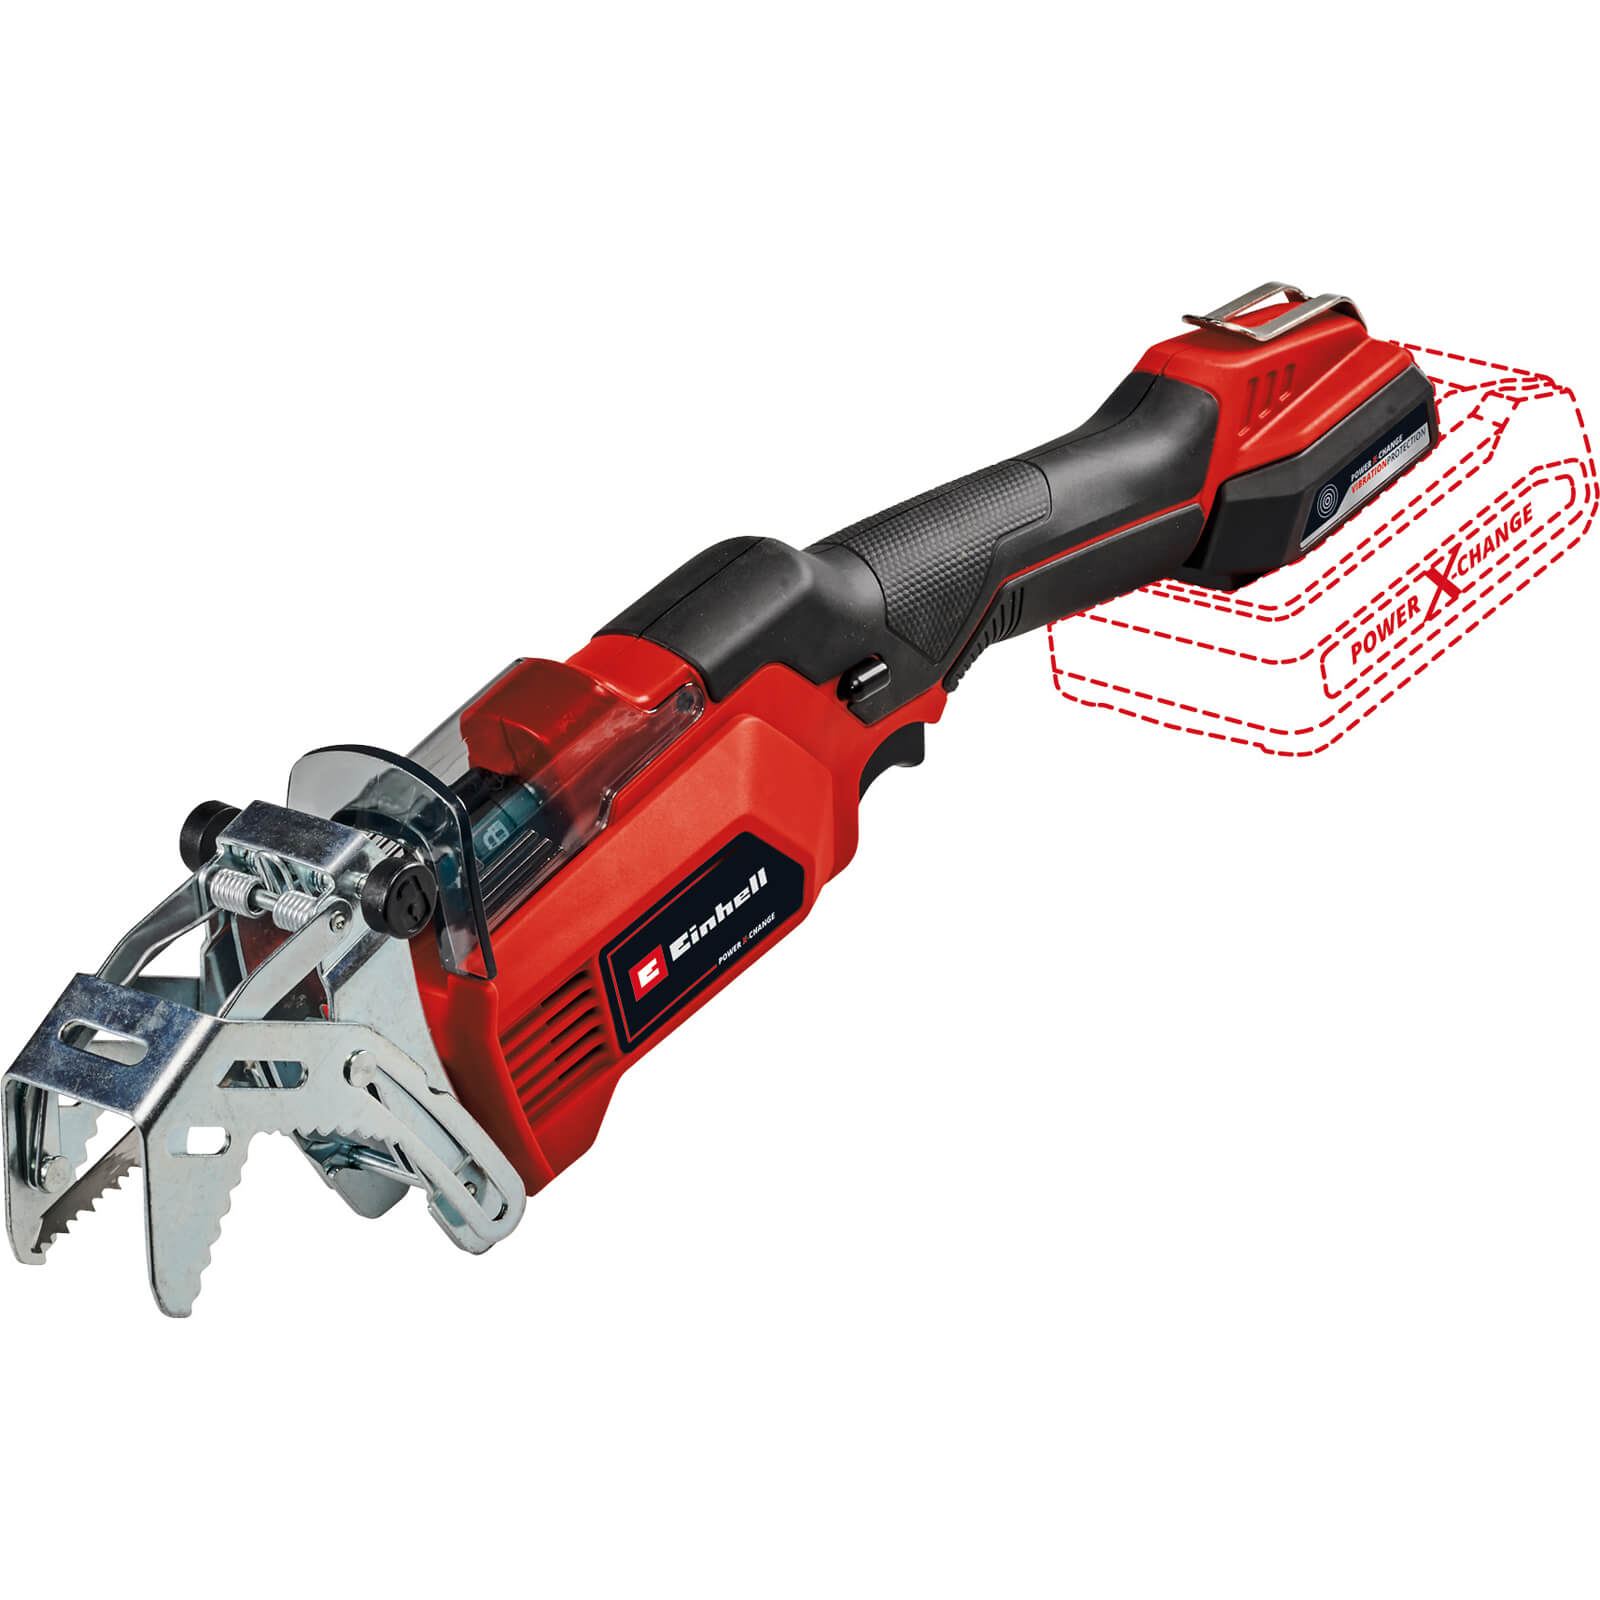 Einhell GE-GS 18/150 Li 18v Cordless Pruning Saw 100mm (New) No Batteries No Charger